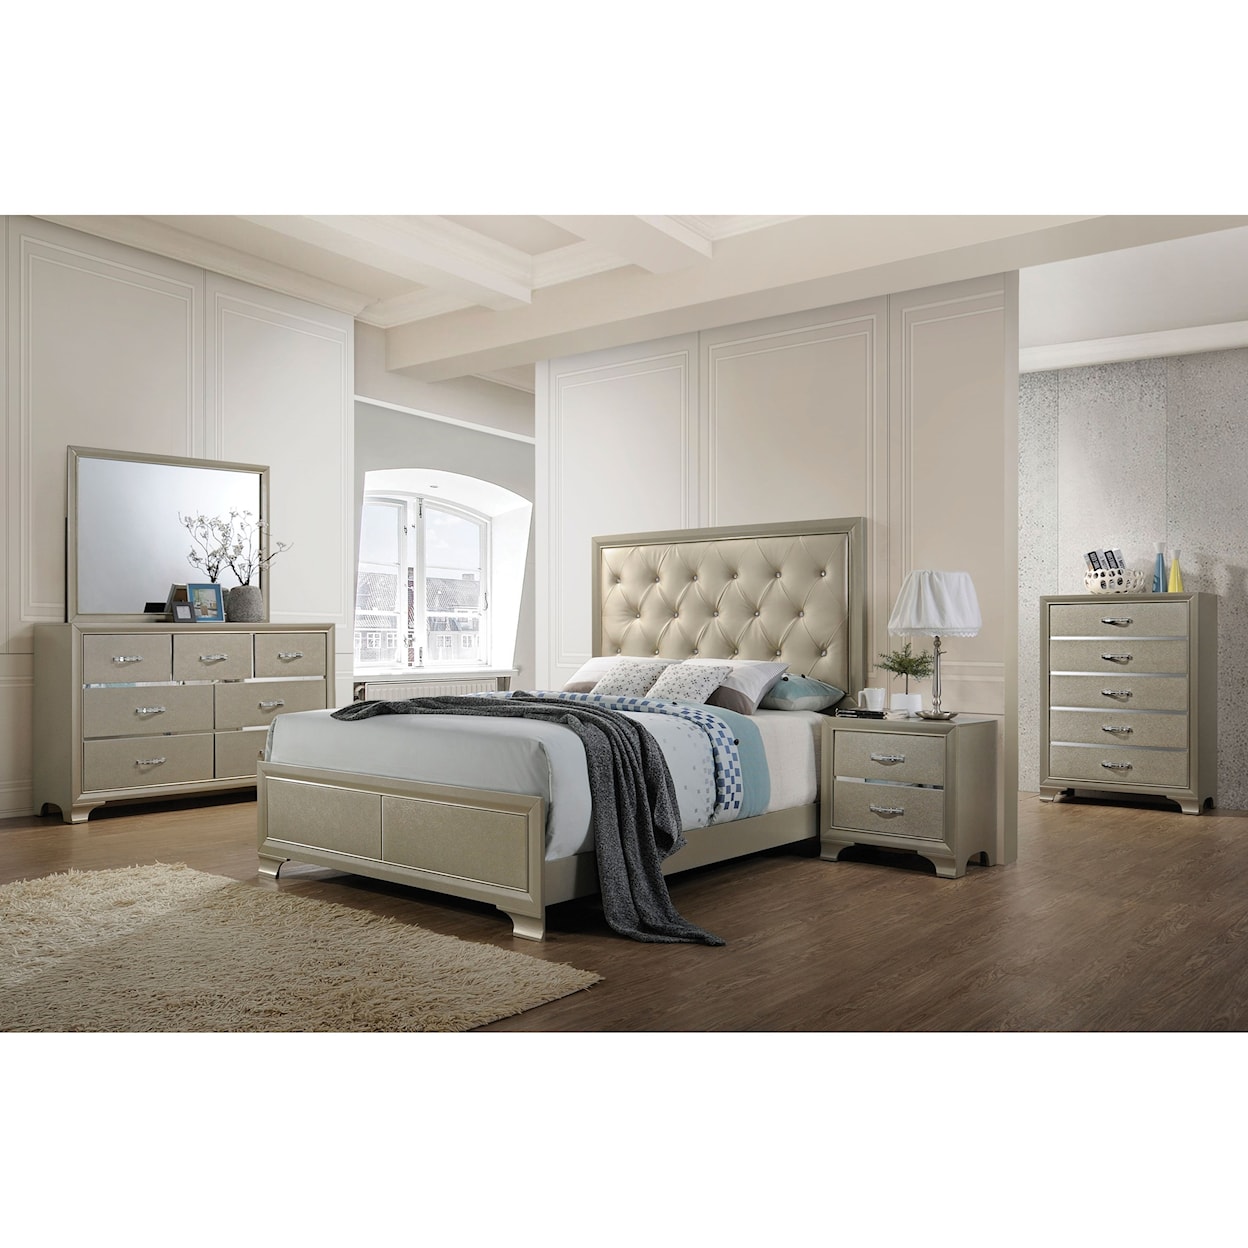 Acme Furniture Carine 7pc Queen Bedroom Group